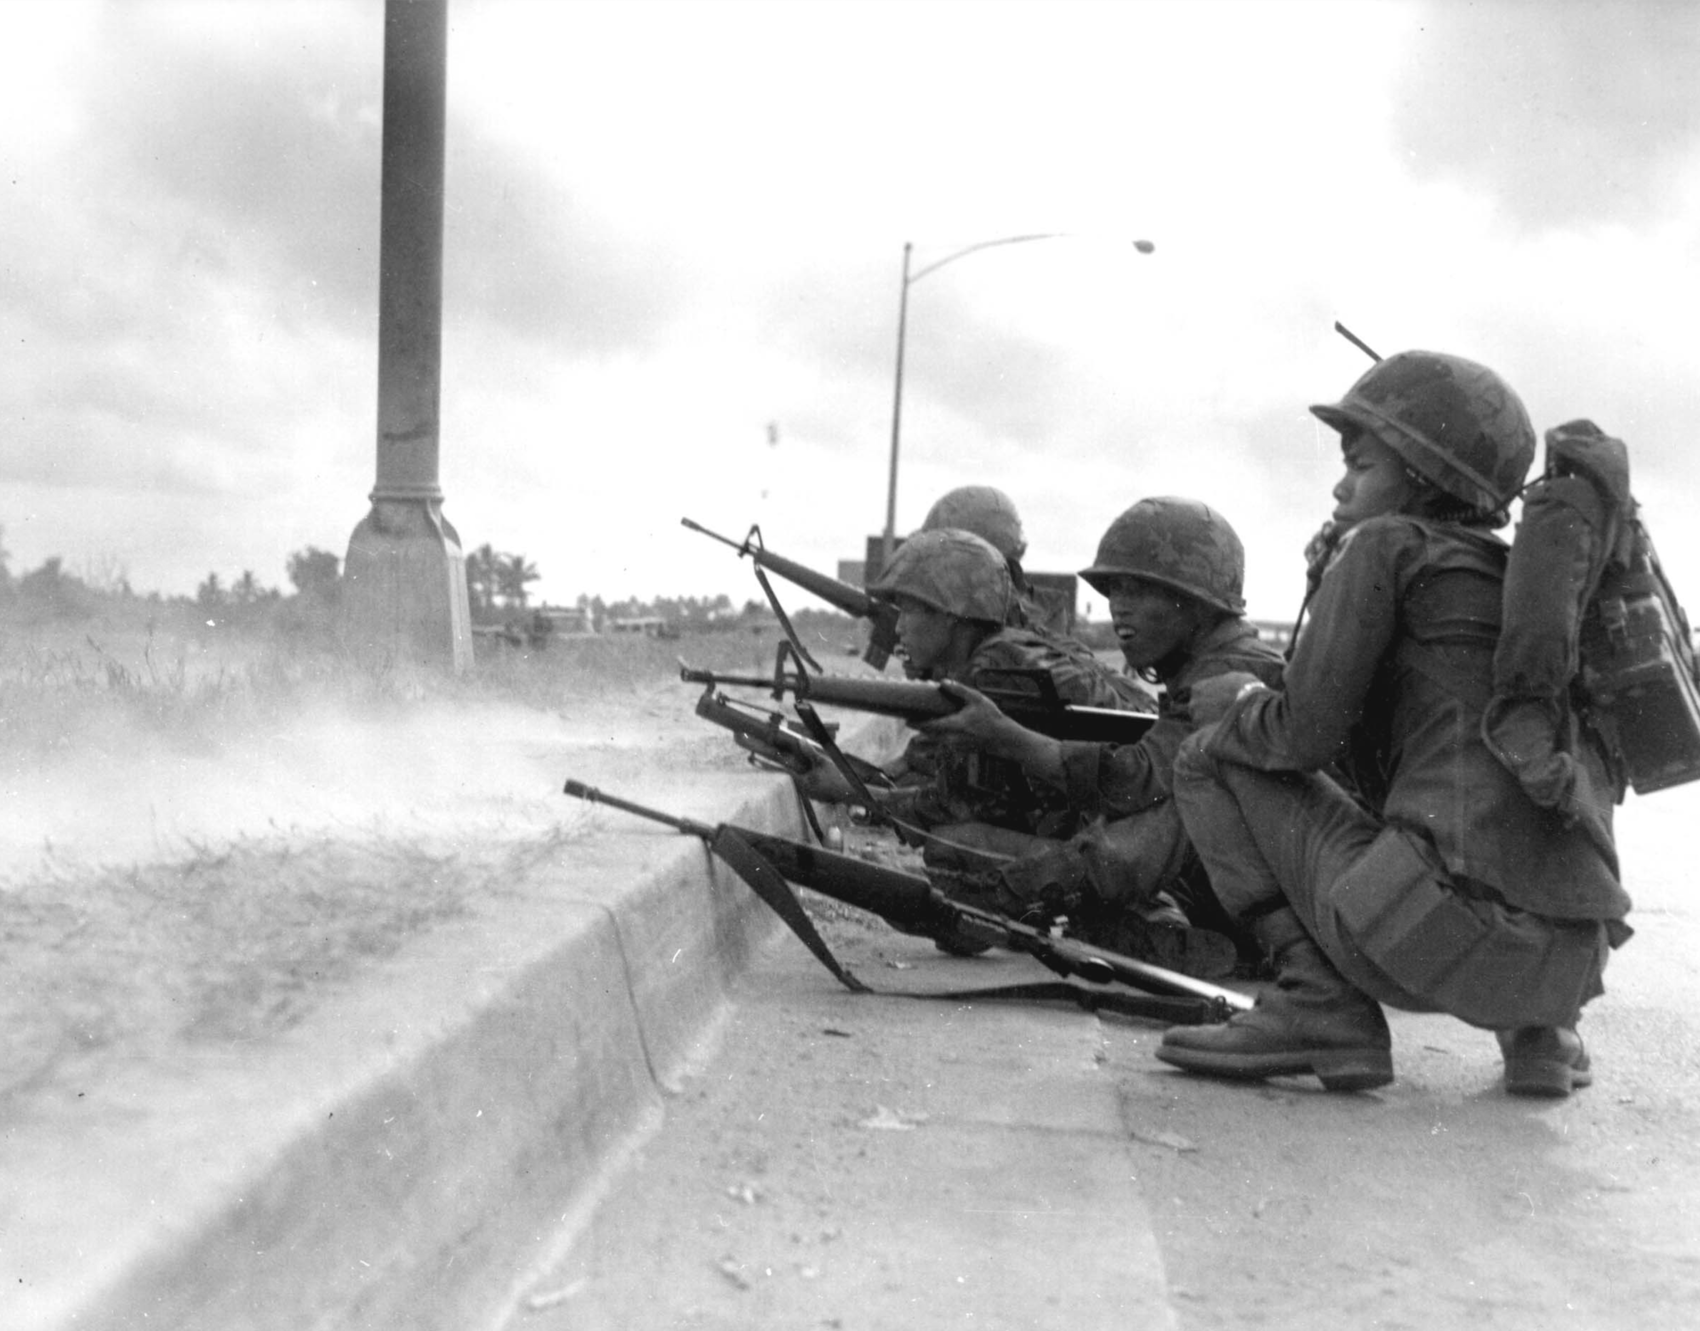 What You Should Know About the Tet Offensive